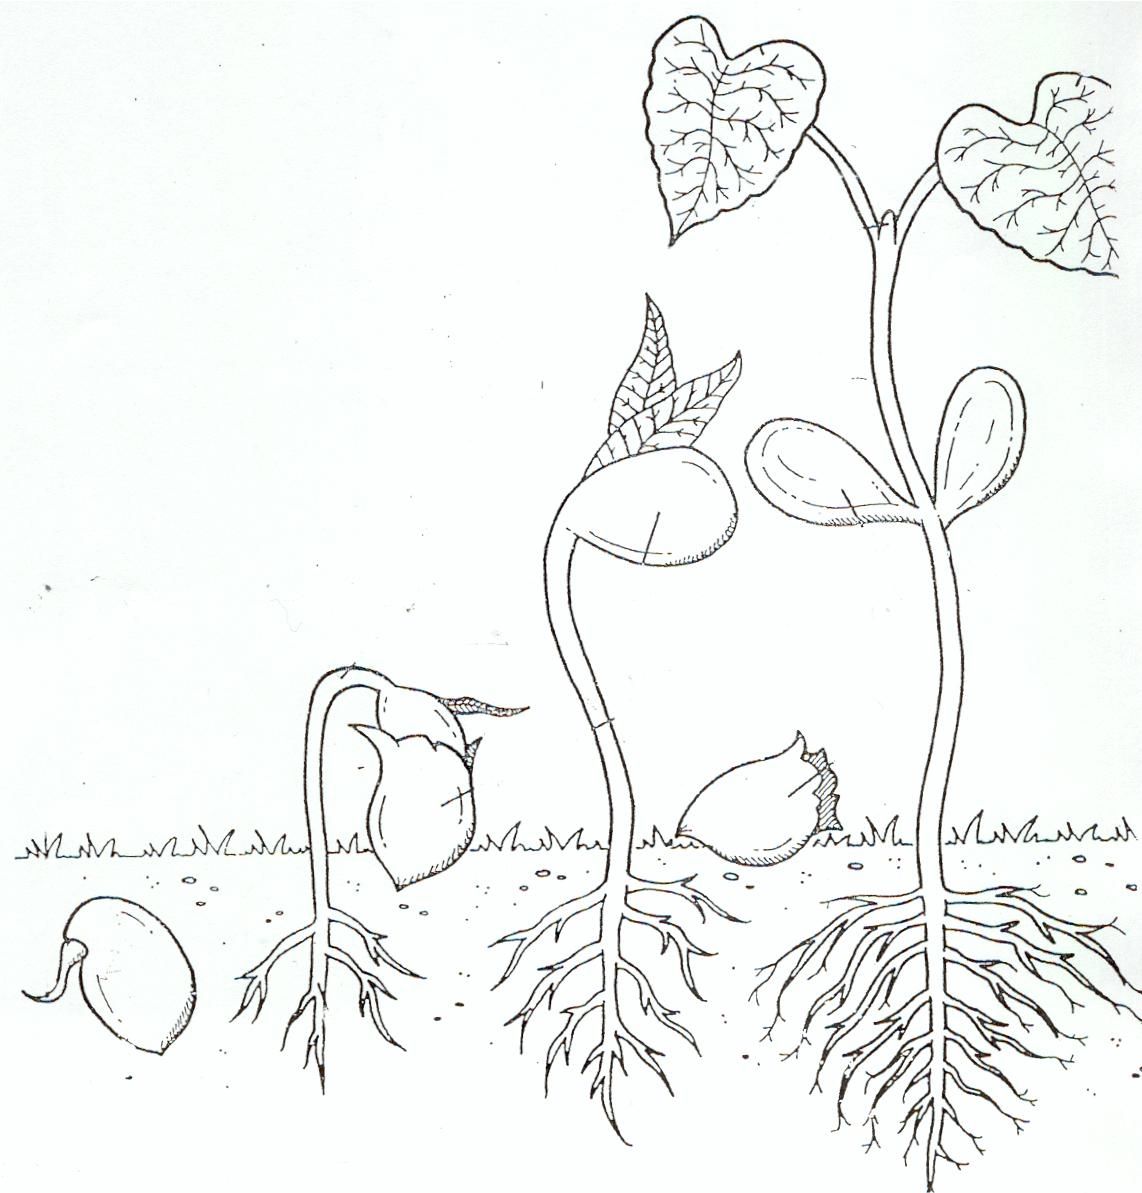 Life Cycle Coloring Page of a Seed to Plant A | Flower life cycle ...